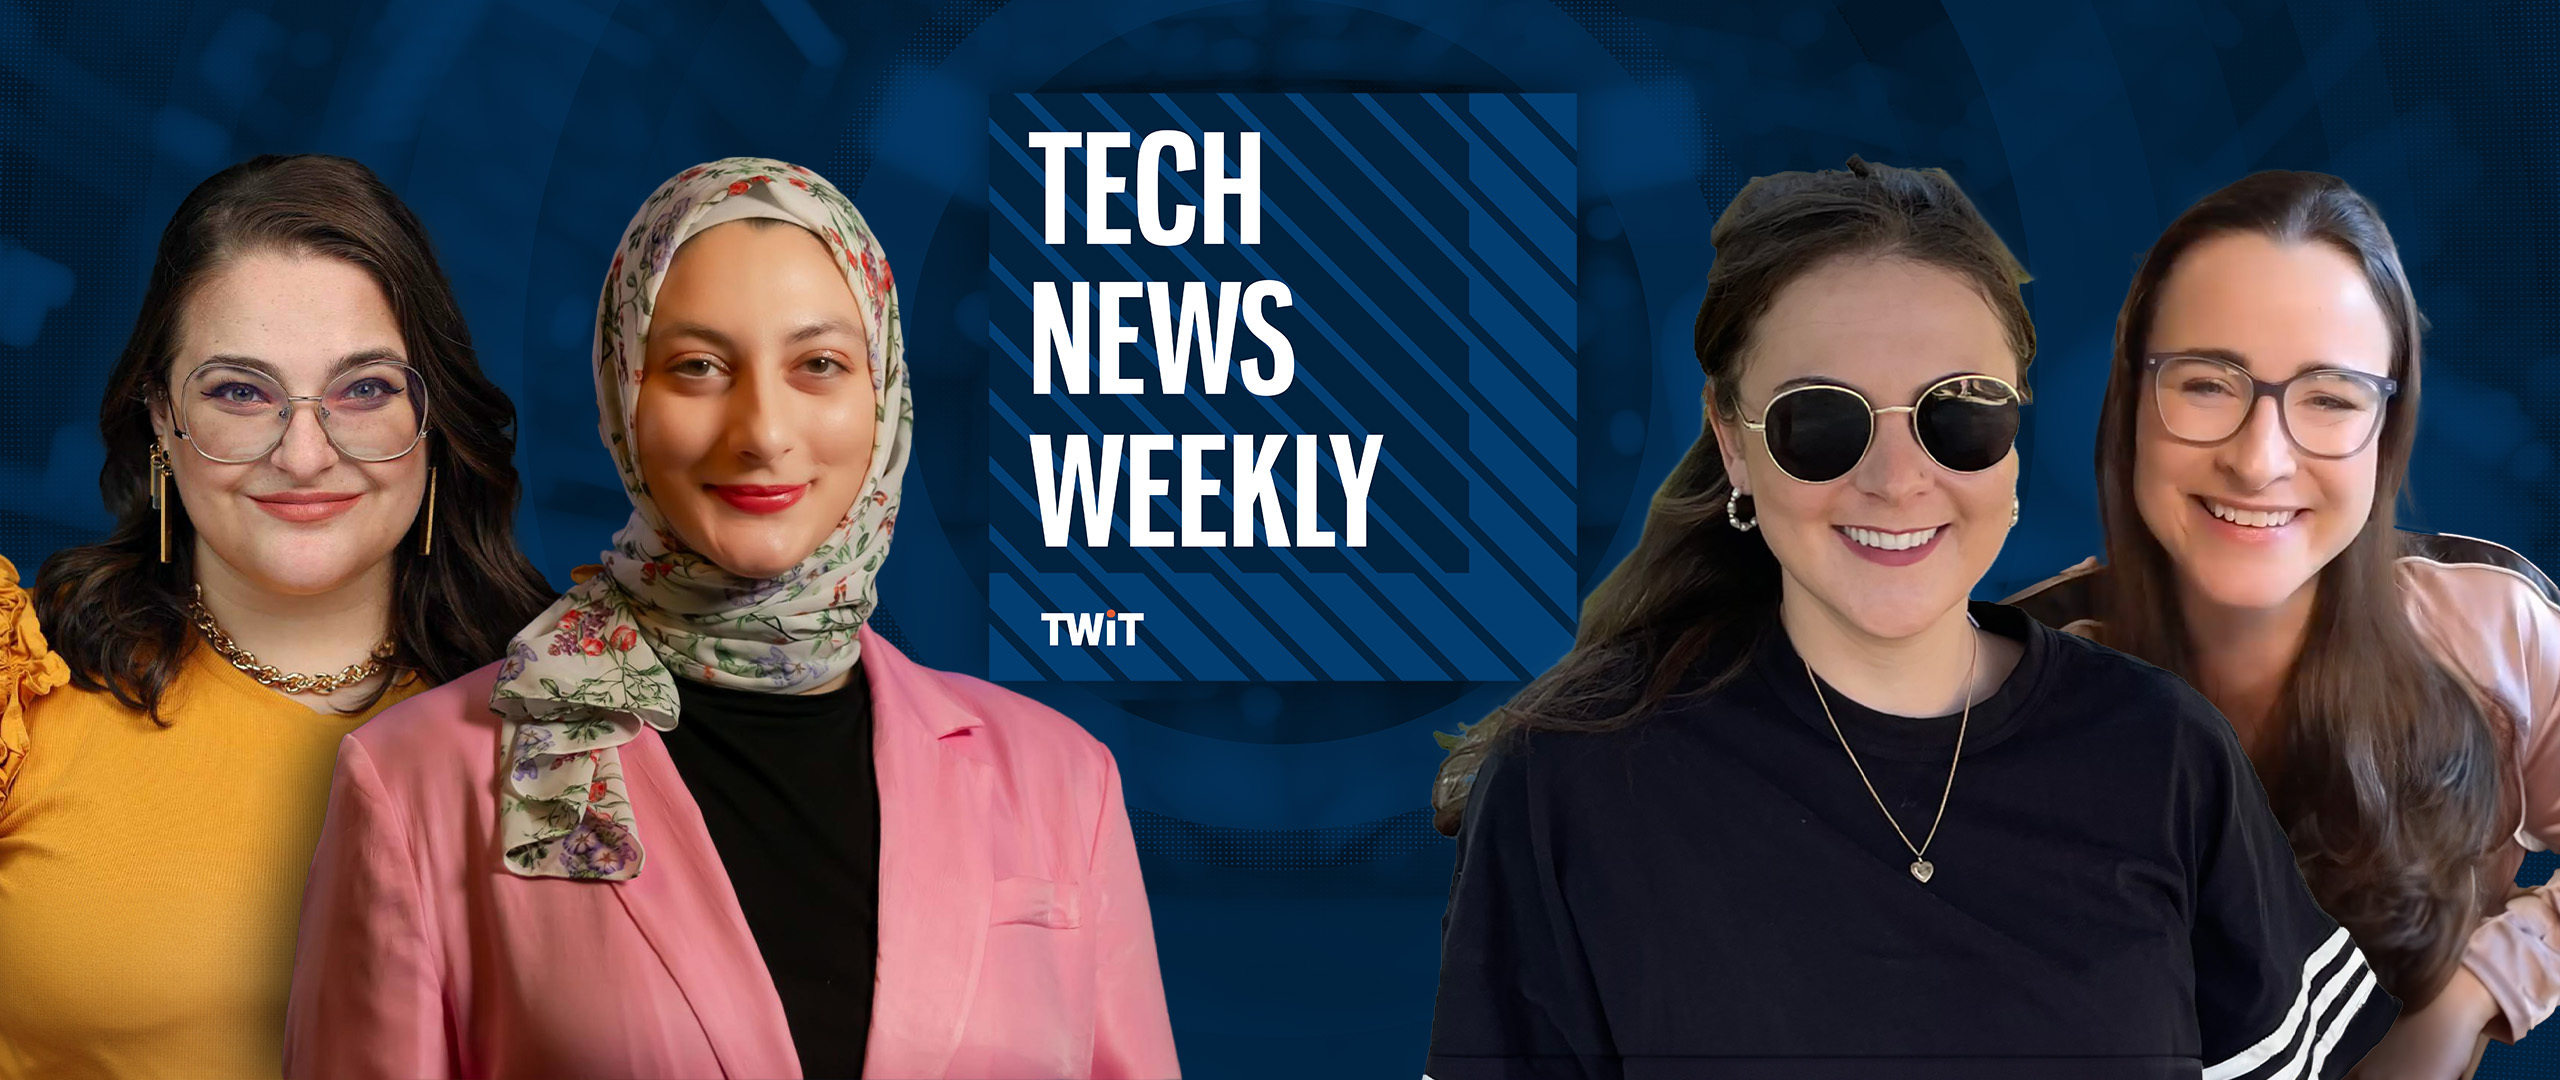 Tech News Weekly with Amanda Silberling, Abrar Al-Heeti, Jennifer Pattison Tuohy, and Emily Dreibelbis